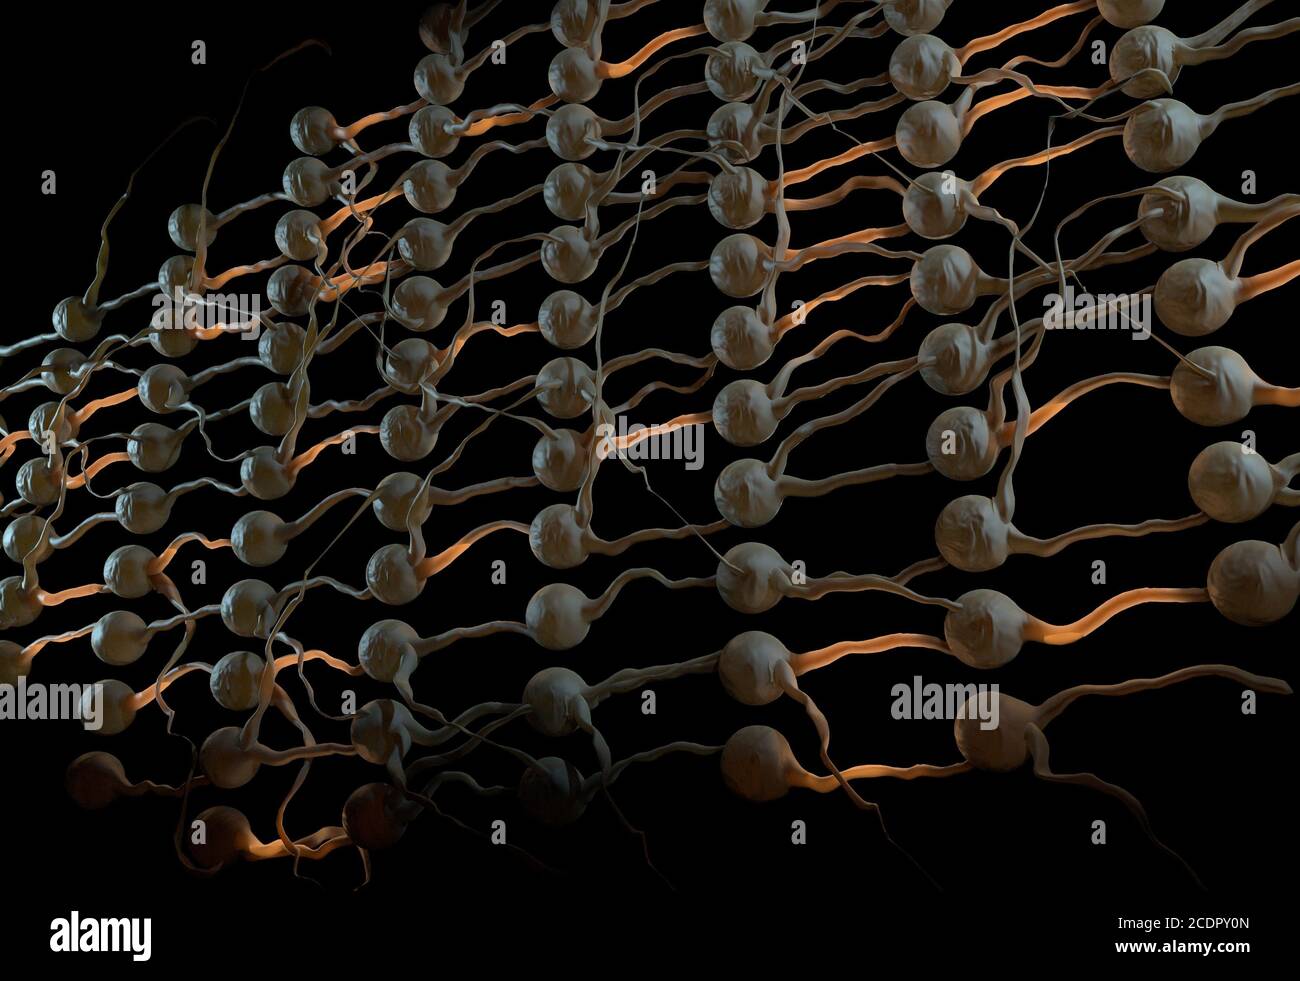 Artifical neural net. Neuron network with connection links. 3d illustration Stock Photo